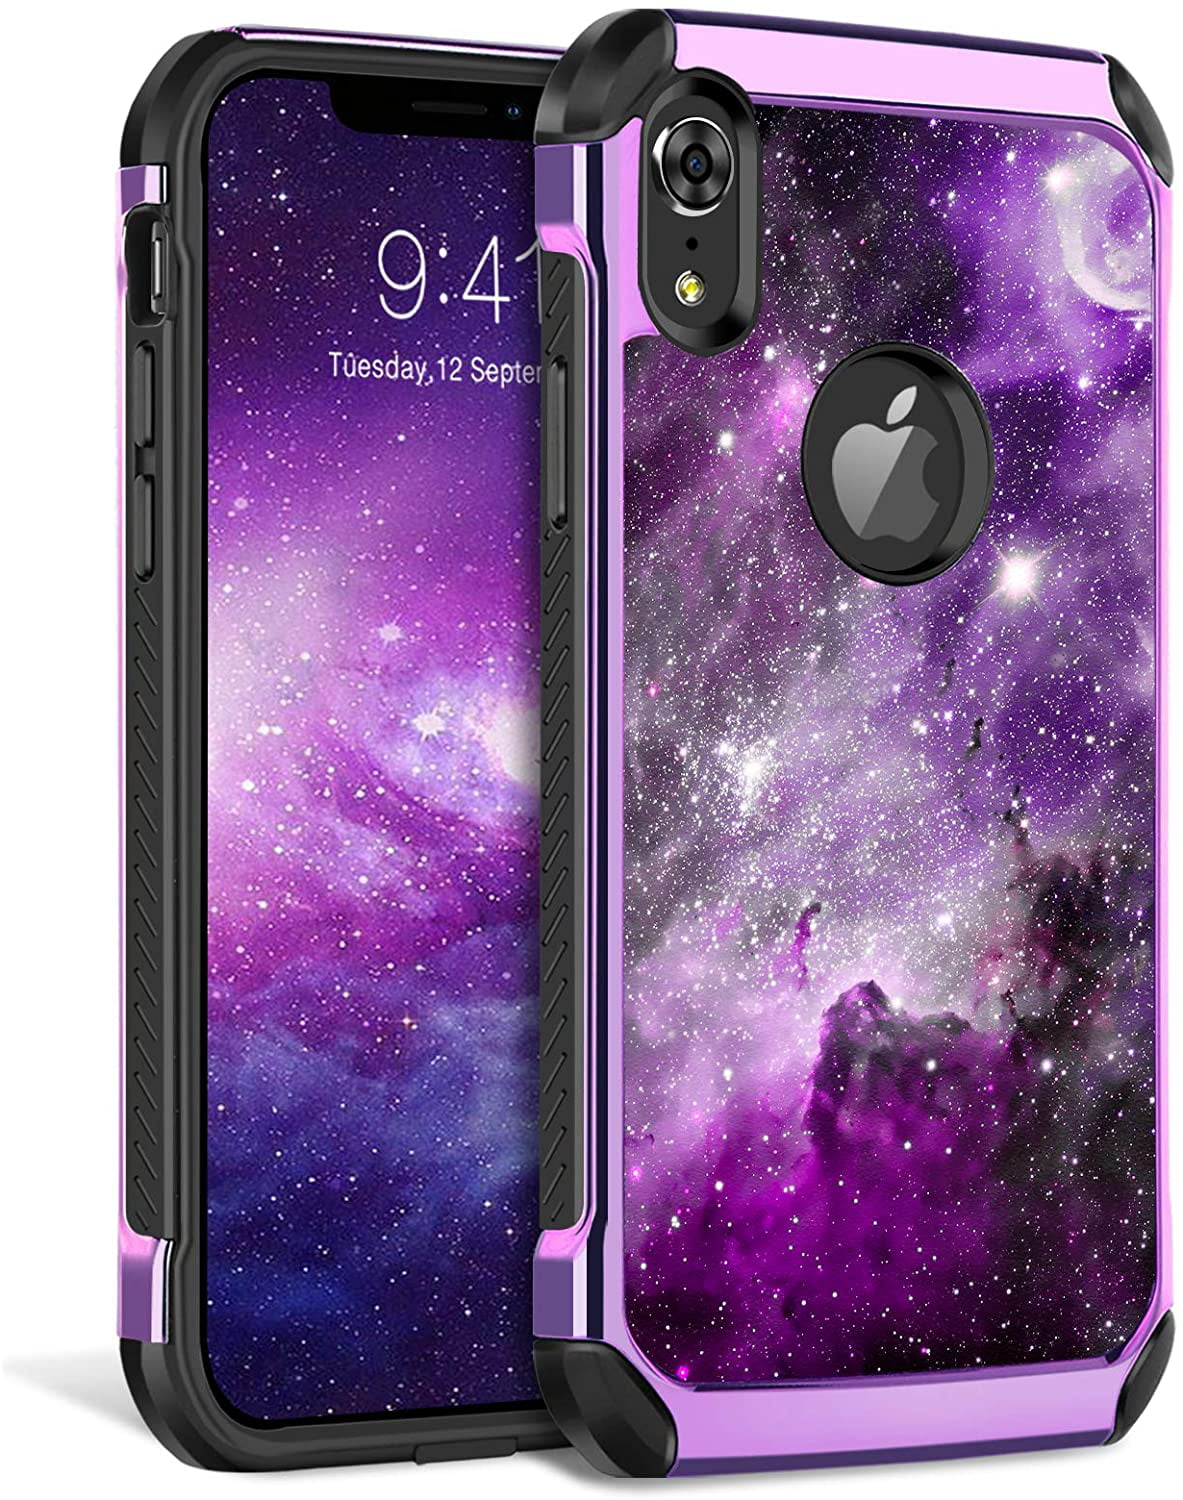 ASD Accessories iPhone XR Crystal Gel Case Skin Clear Shockproof Bumper Case Soft TPU Silicone Case Cover Drop Protection